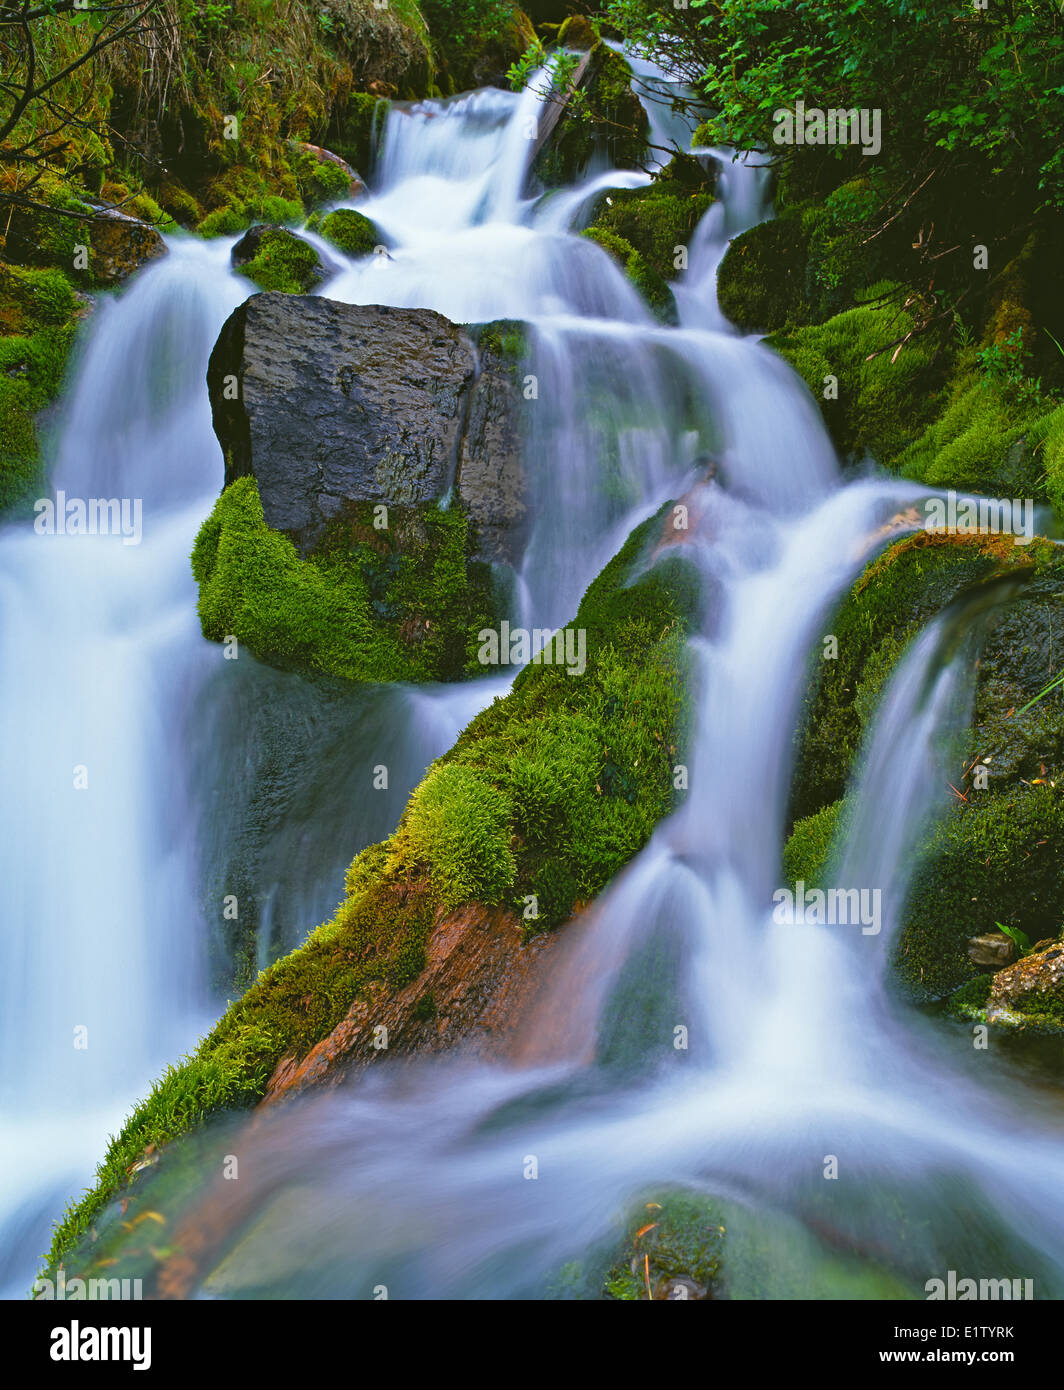 Waterfall flowing through a rain forest on Vancouver Island, British Columbia, Canada Stock Photo